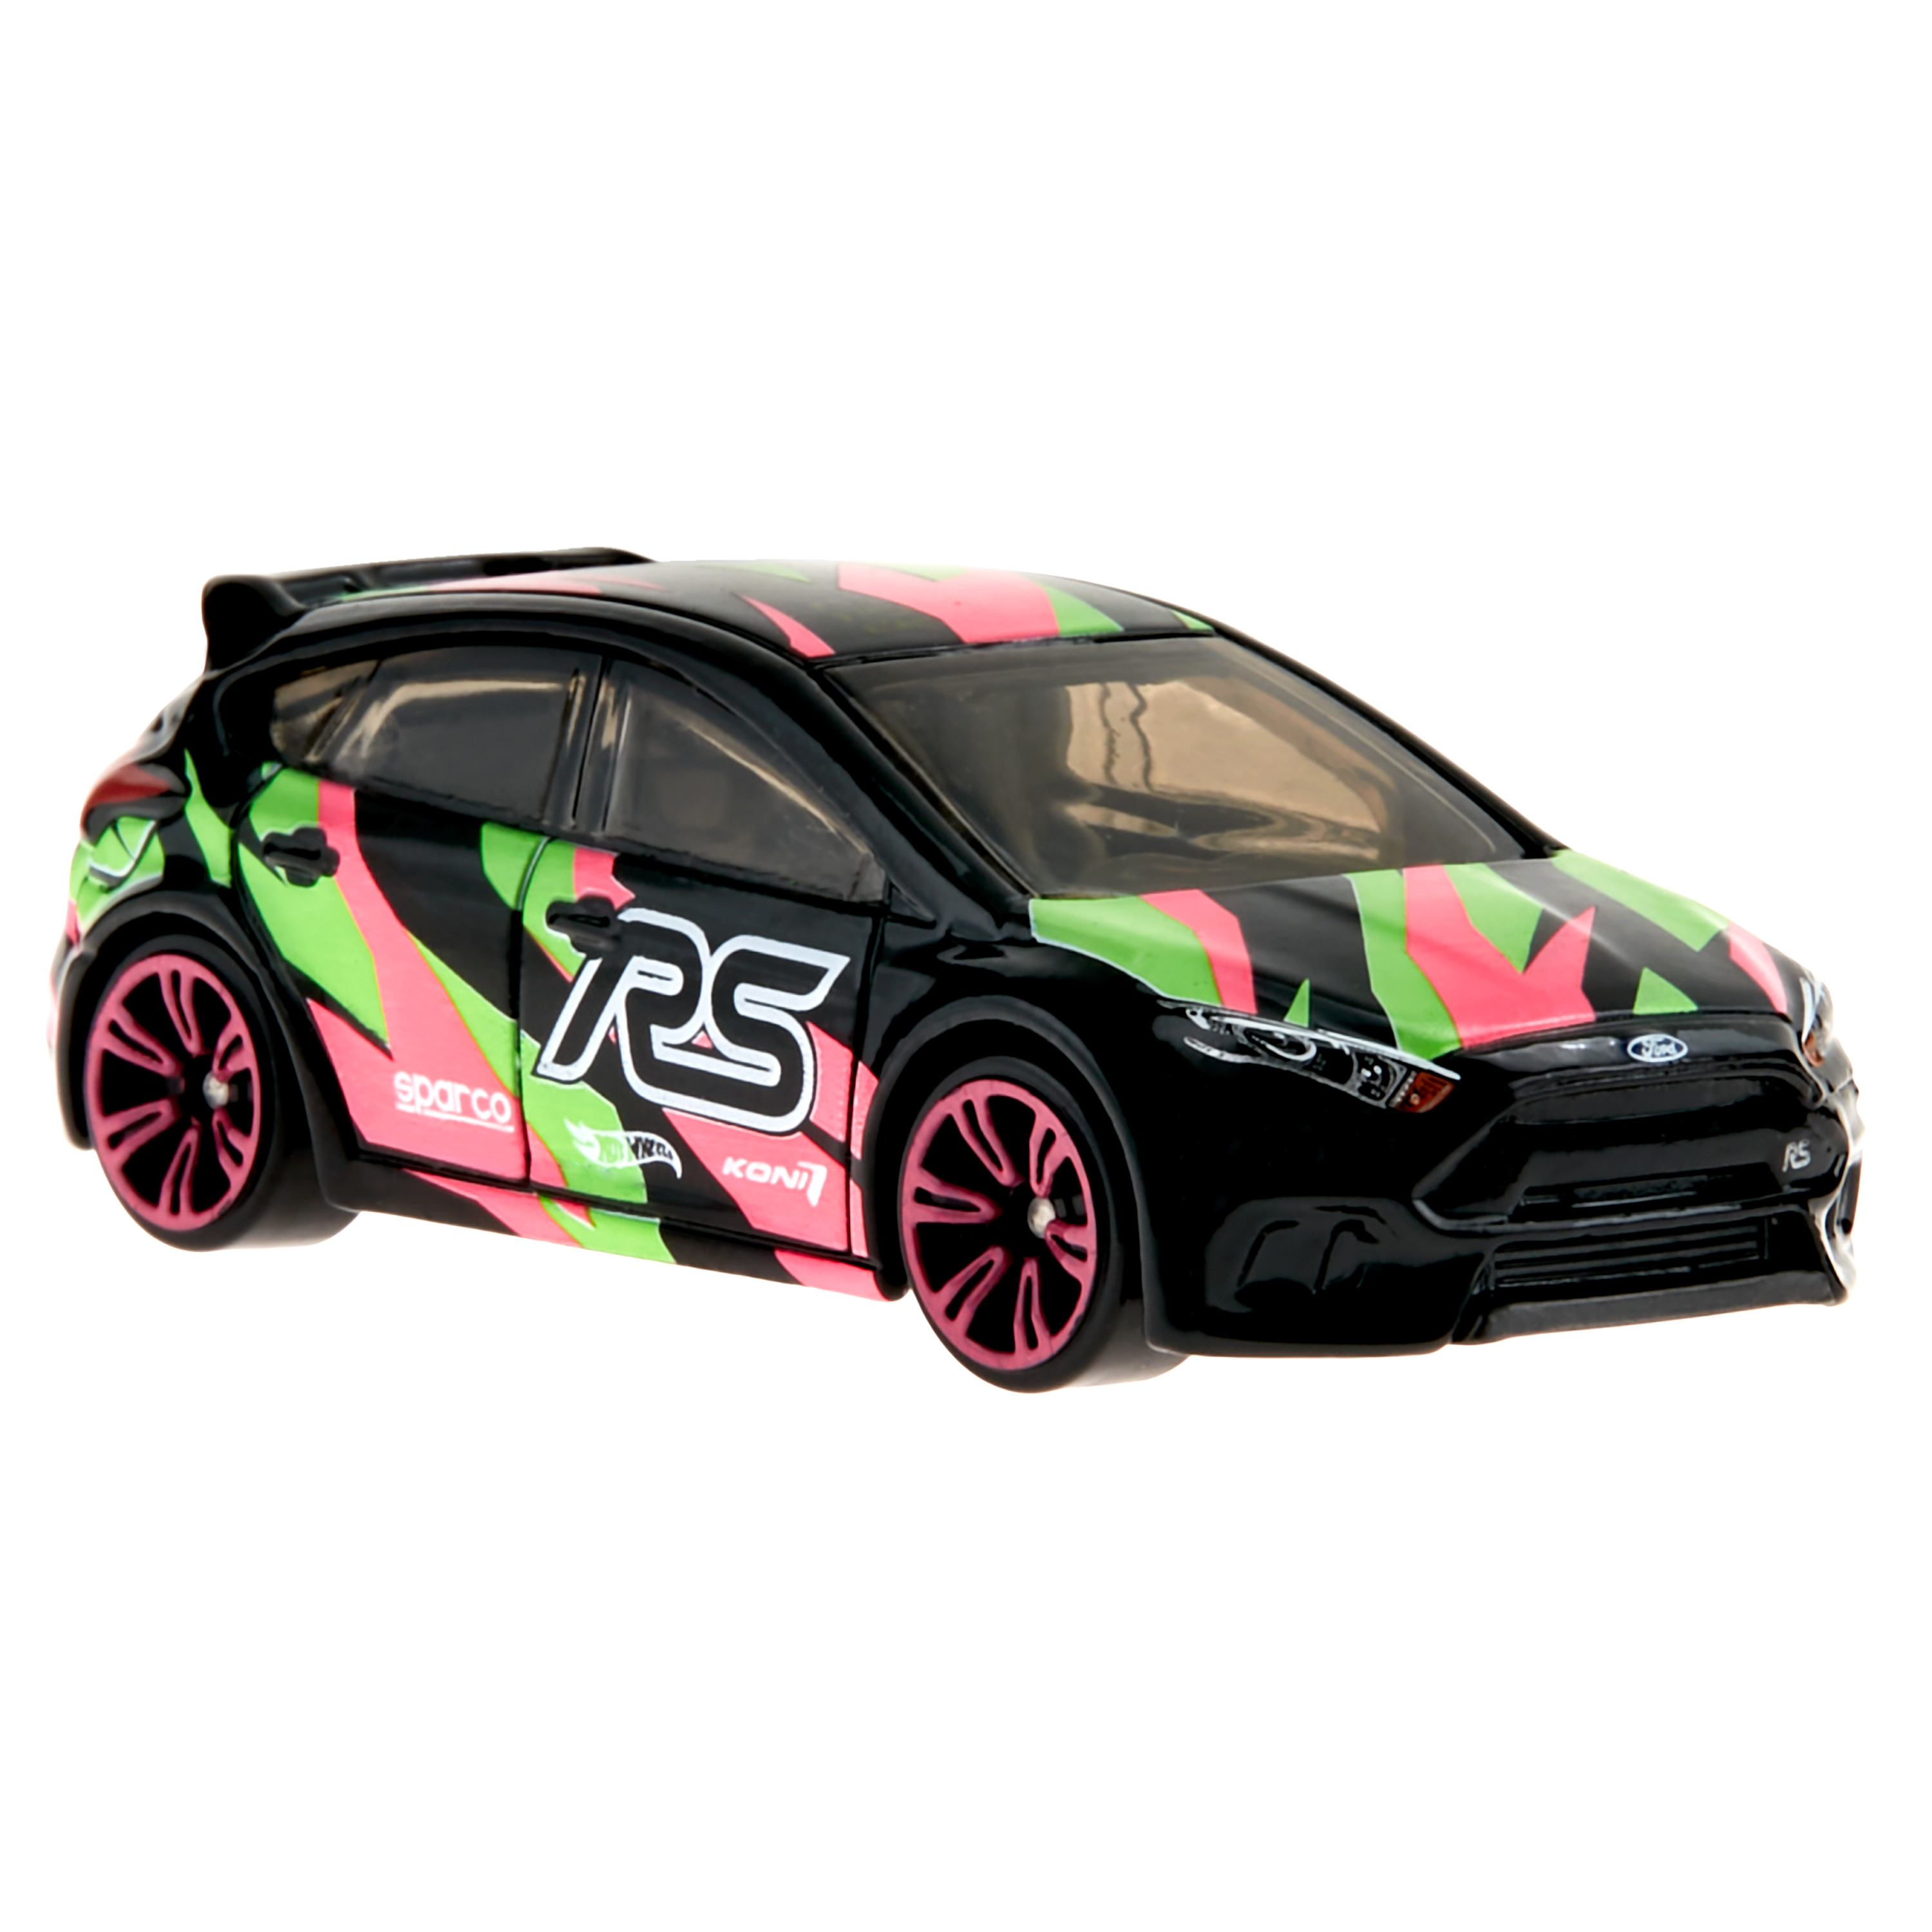 Hot Wheels Cars, Neon Speeders, 1 Die-Cast Toy Car in 1:64 Scale with Neon Designs - image 4 of 6